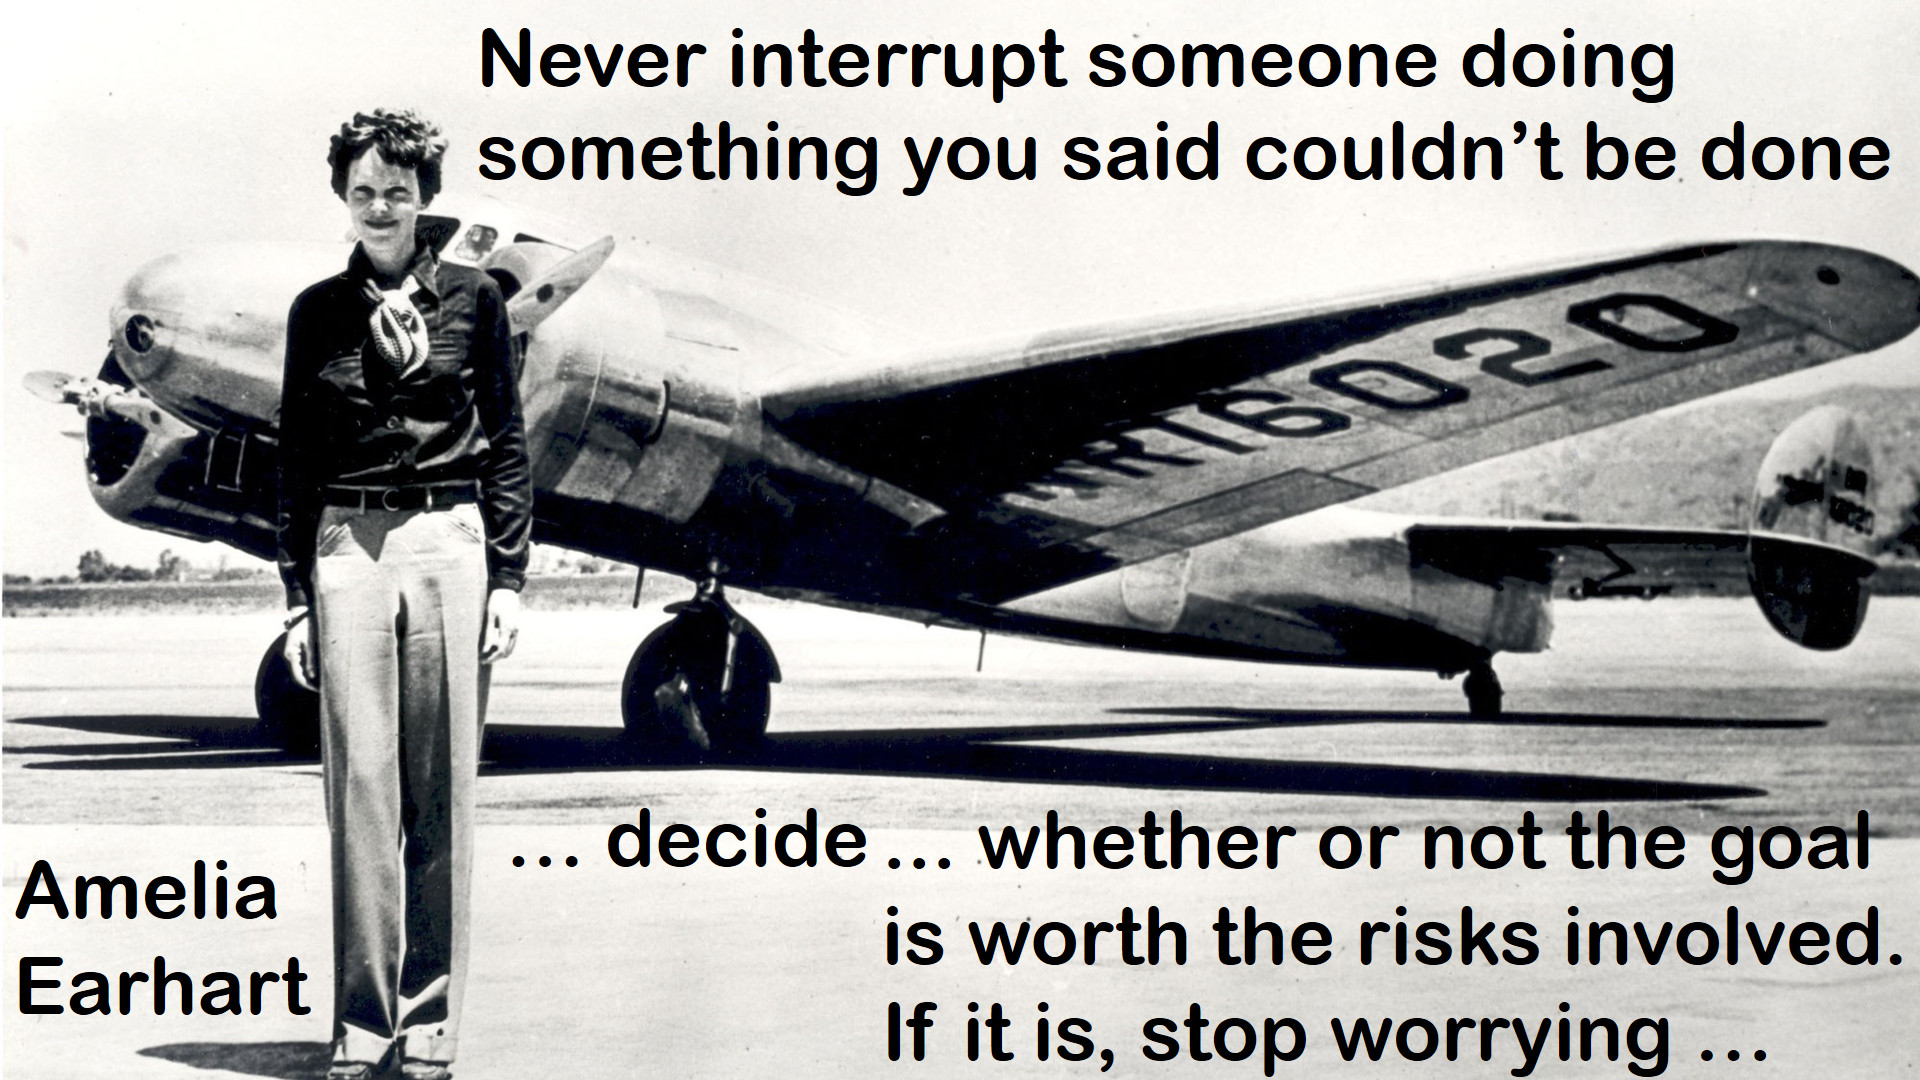 Never interrupt someone doing something you said couldn't be done ... decide ... whether or not the goal is worth the risks involved. If it is, stop worrying ...